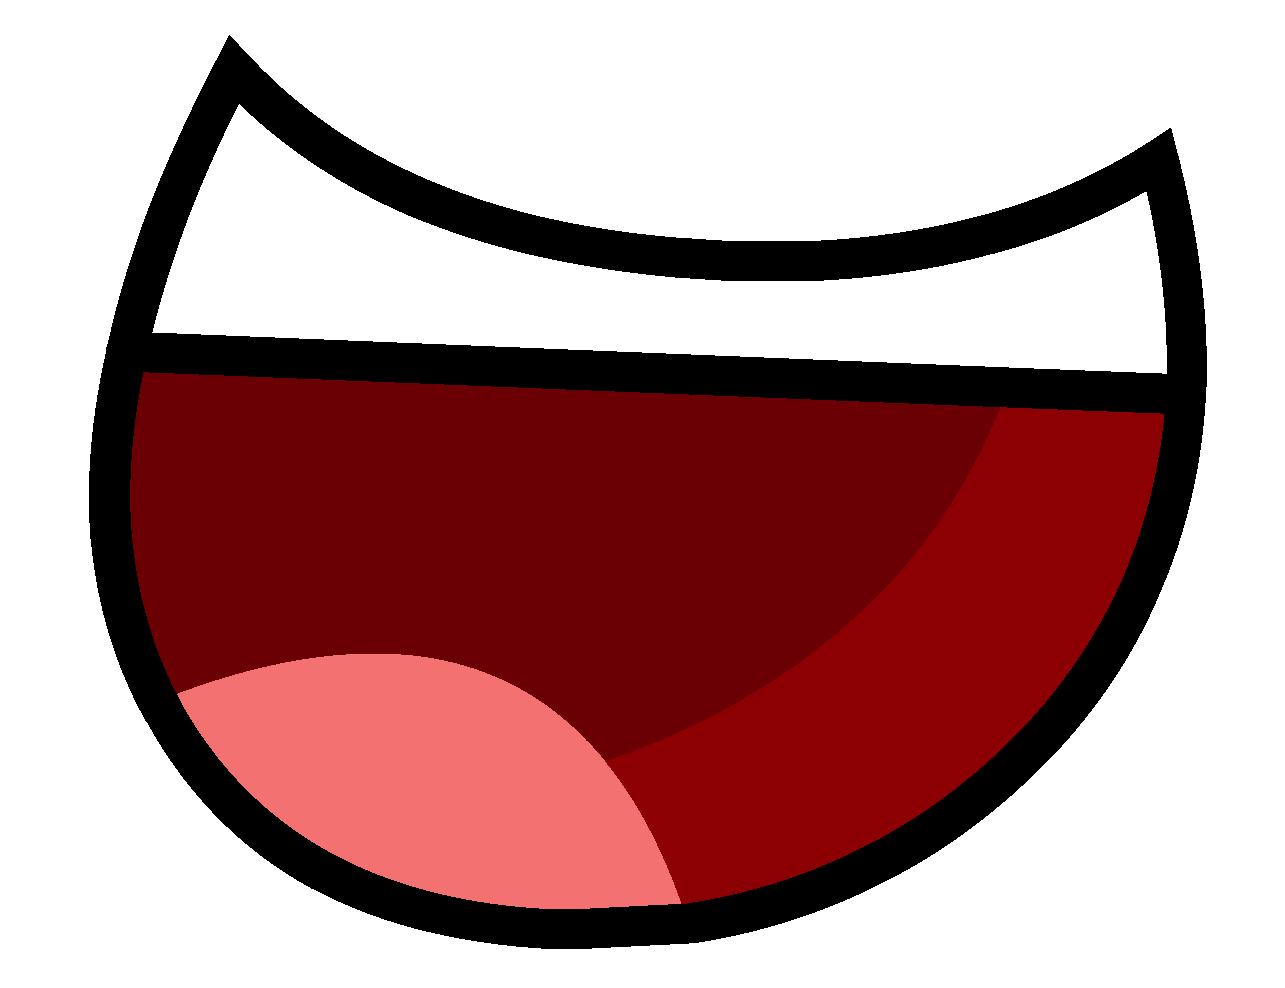 Open mouth clipart gif